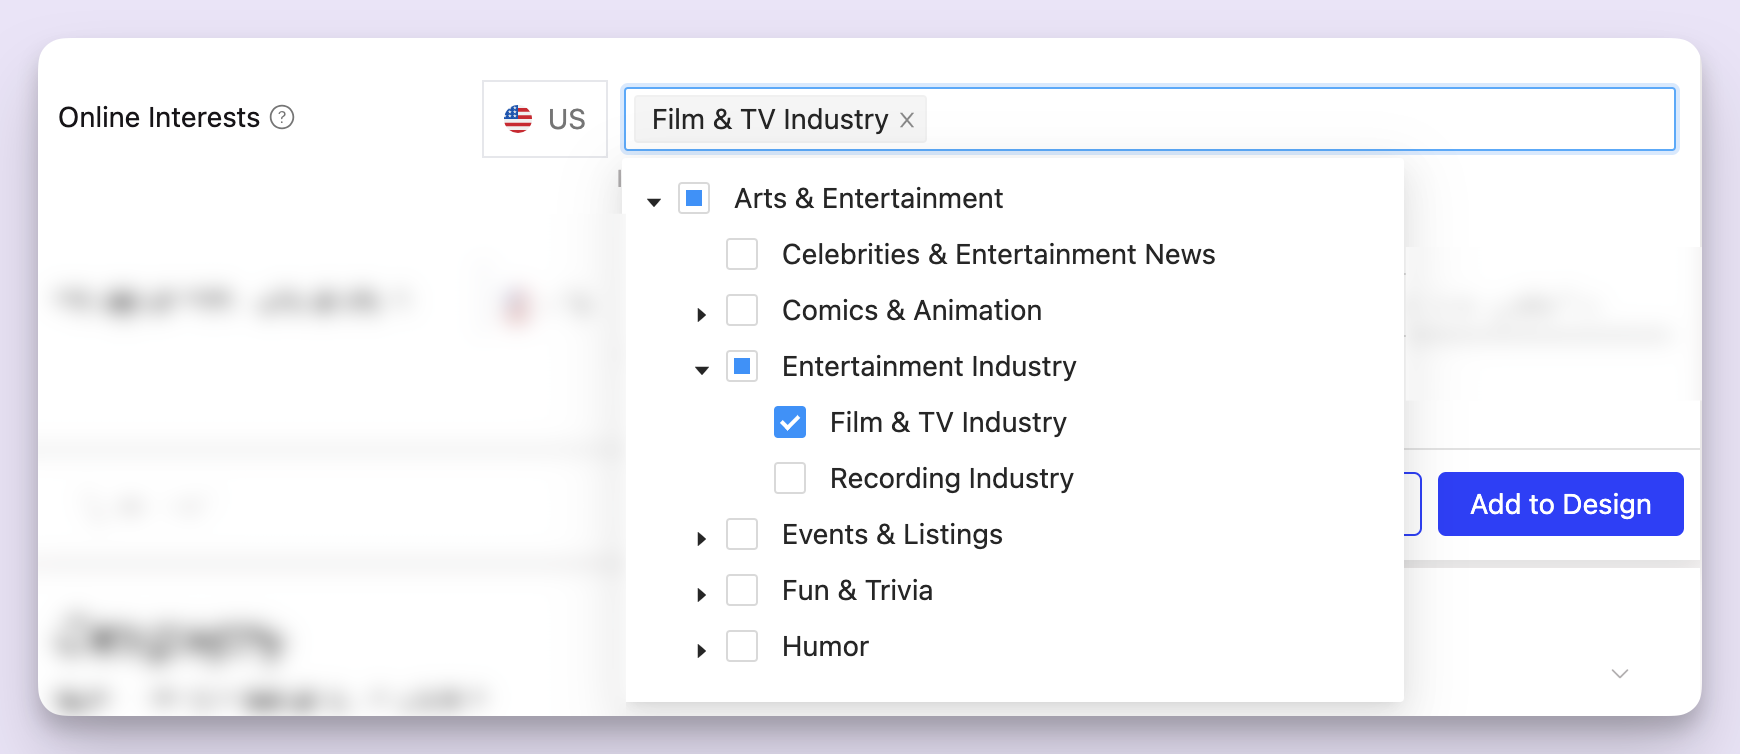 Selecting the Film & TV Industry online interest.